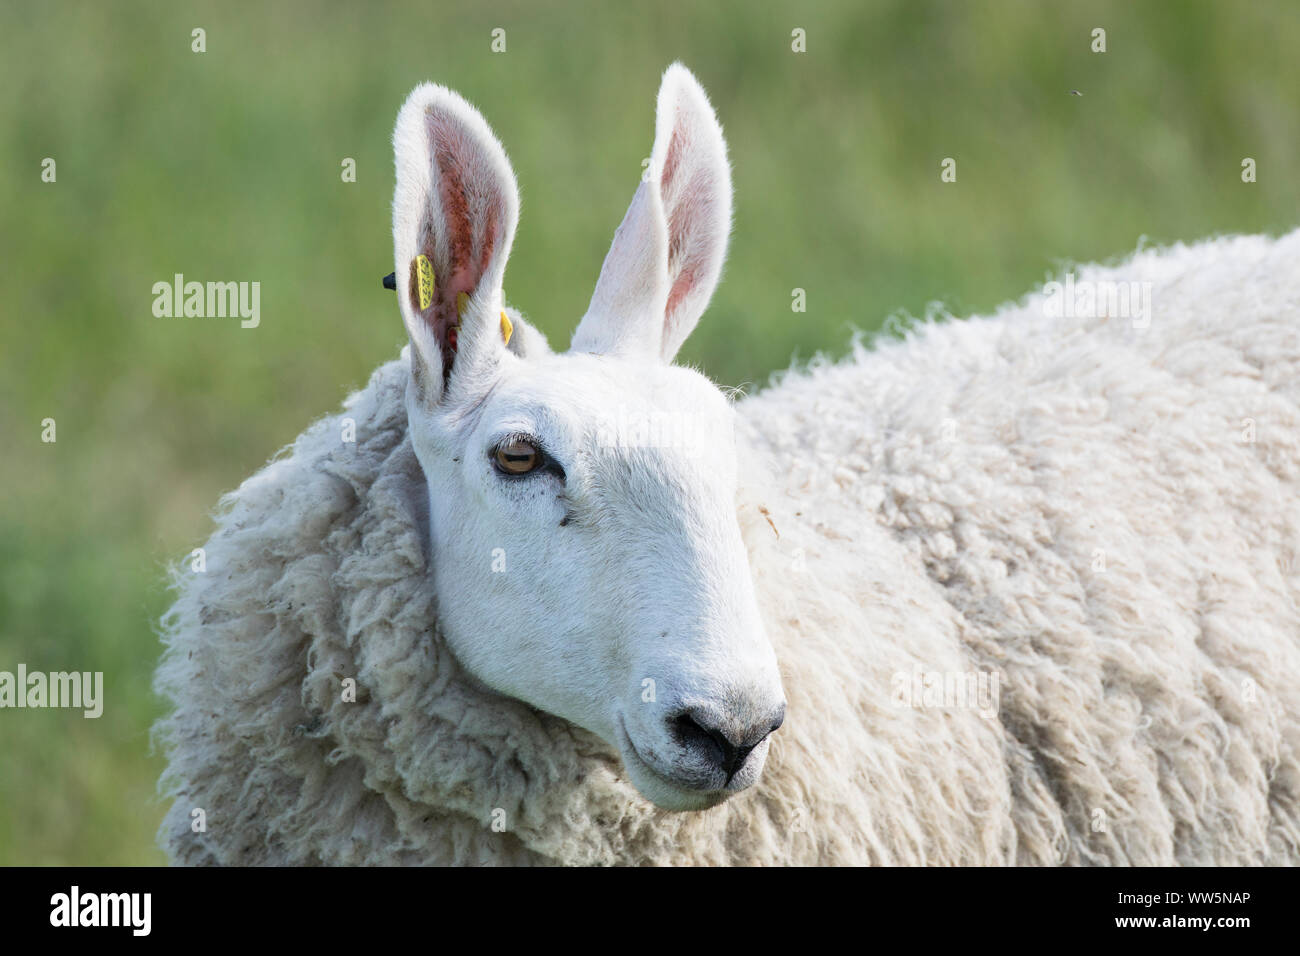 Sheep with hare's ears Stock Photo